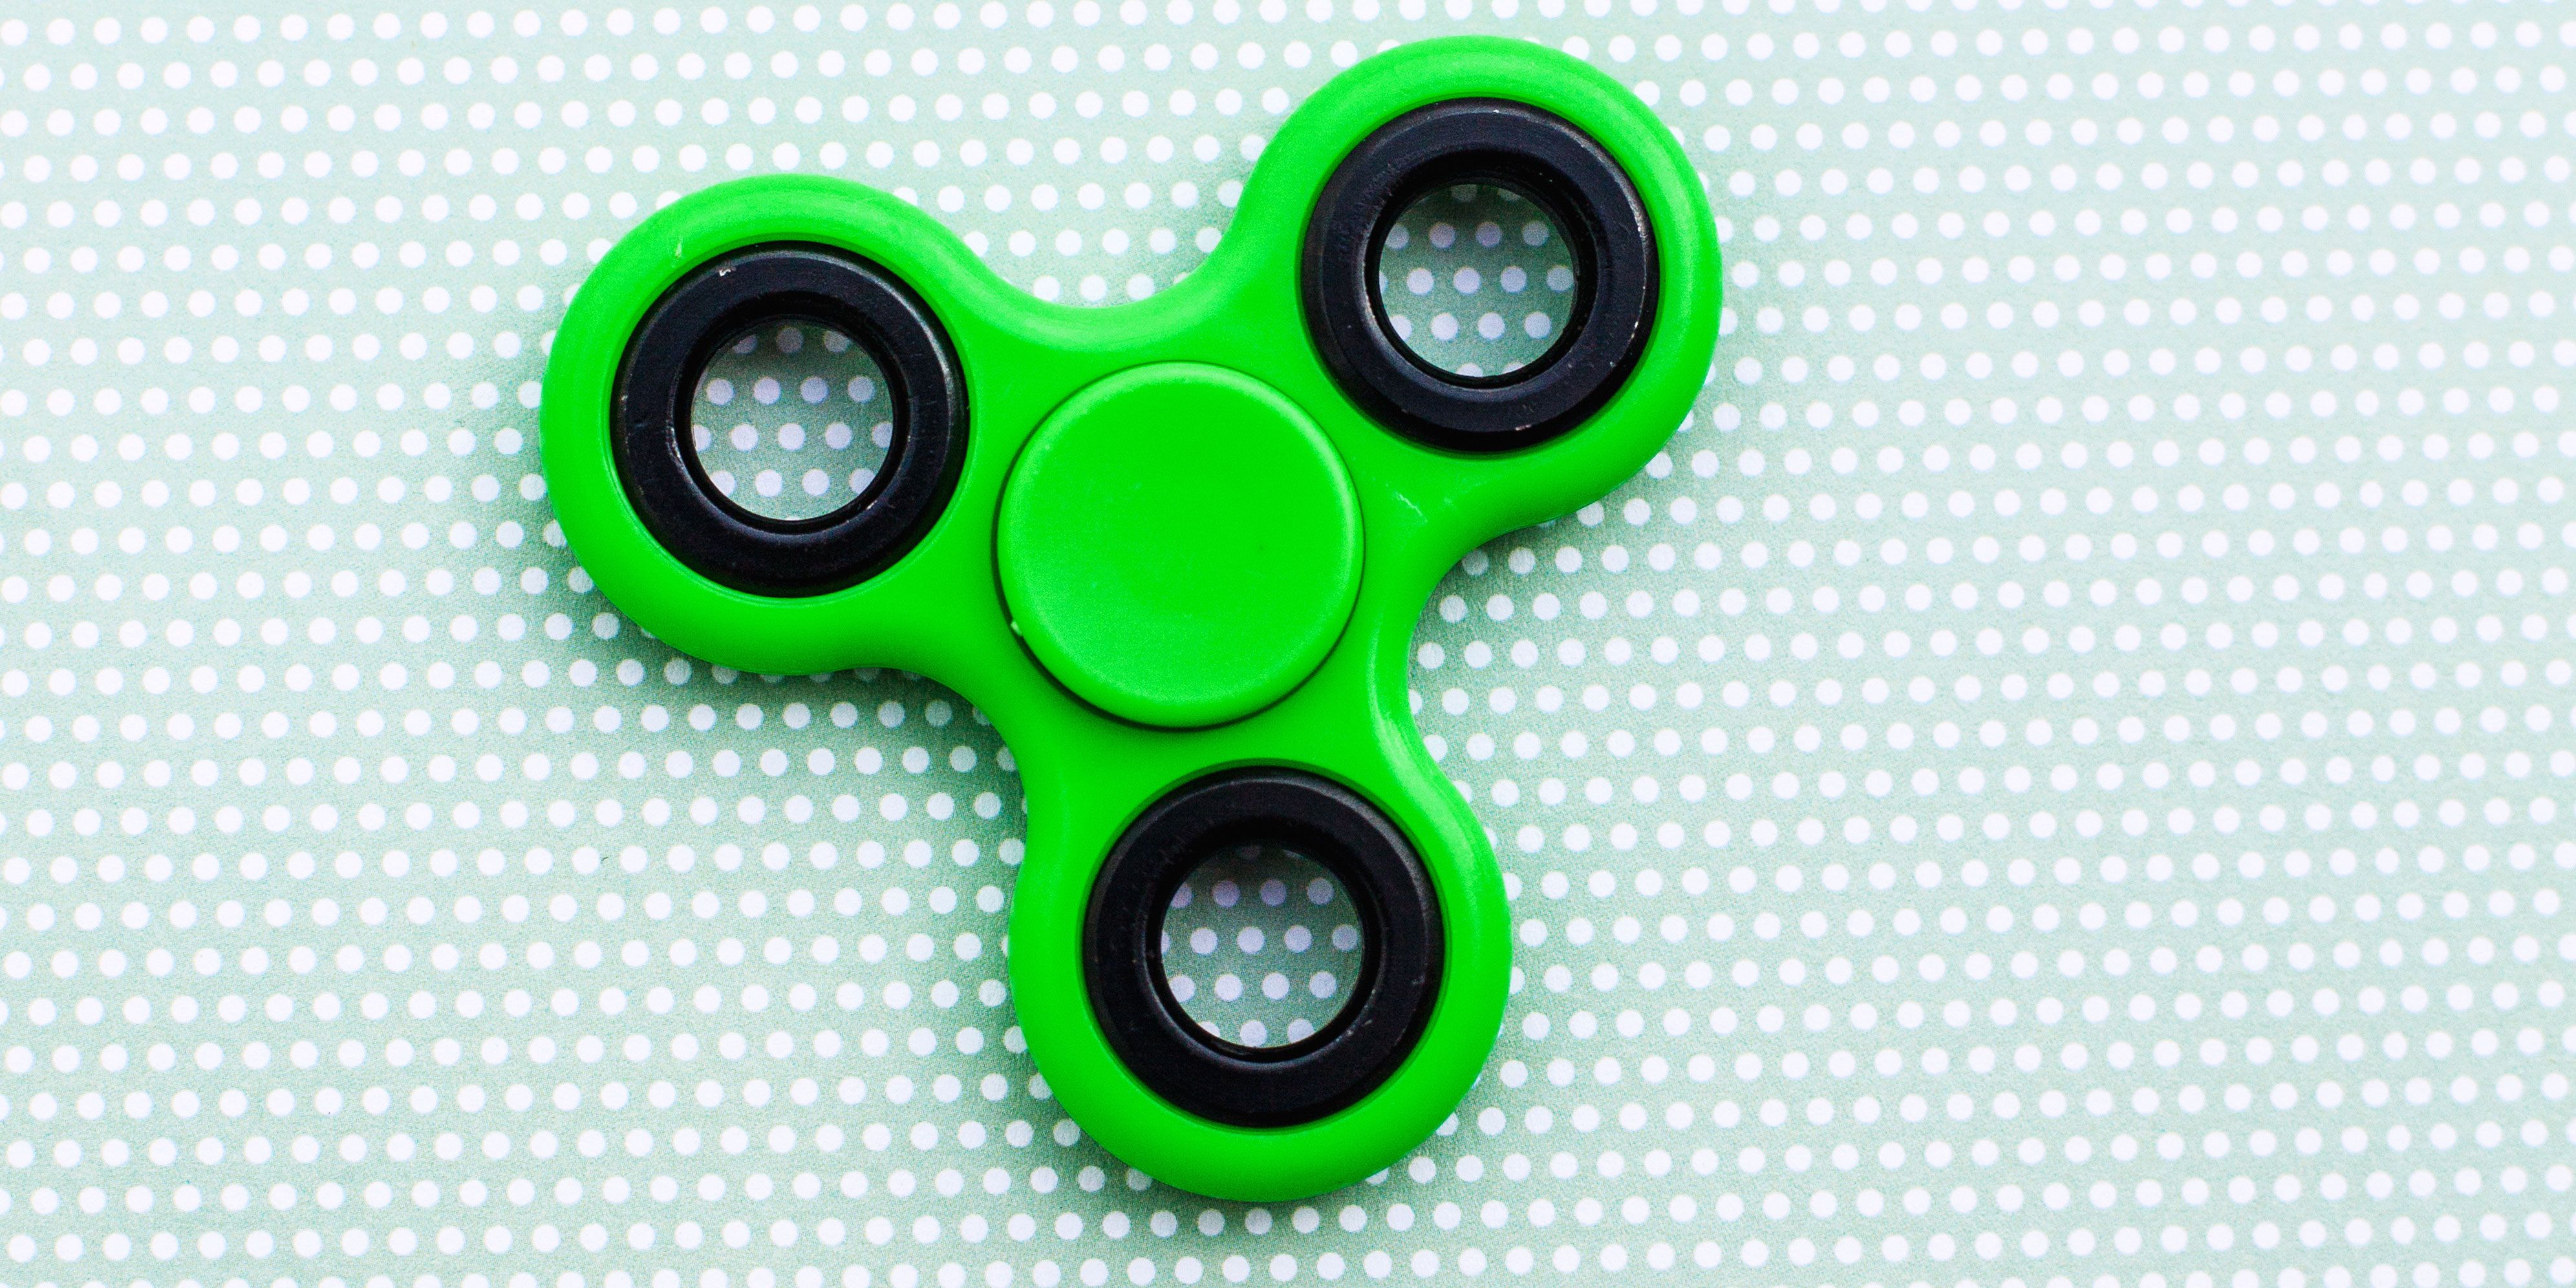 Fidget Spinner - Product Information, Latest Updates, and Reviews